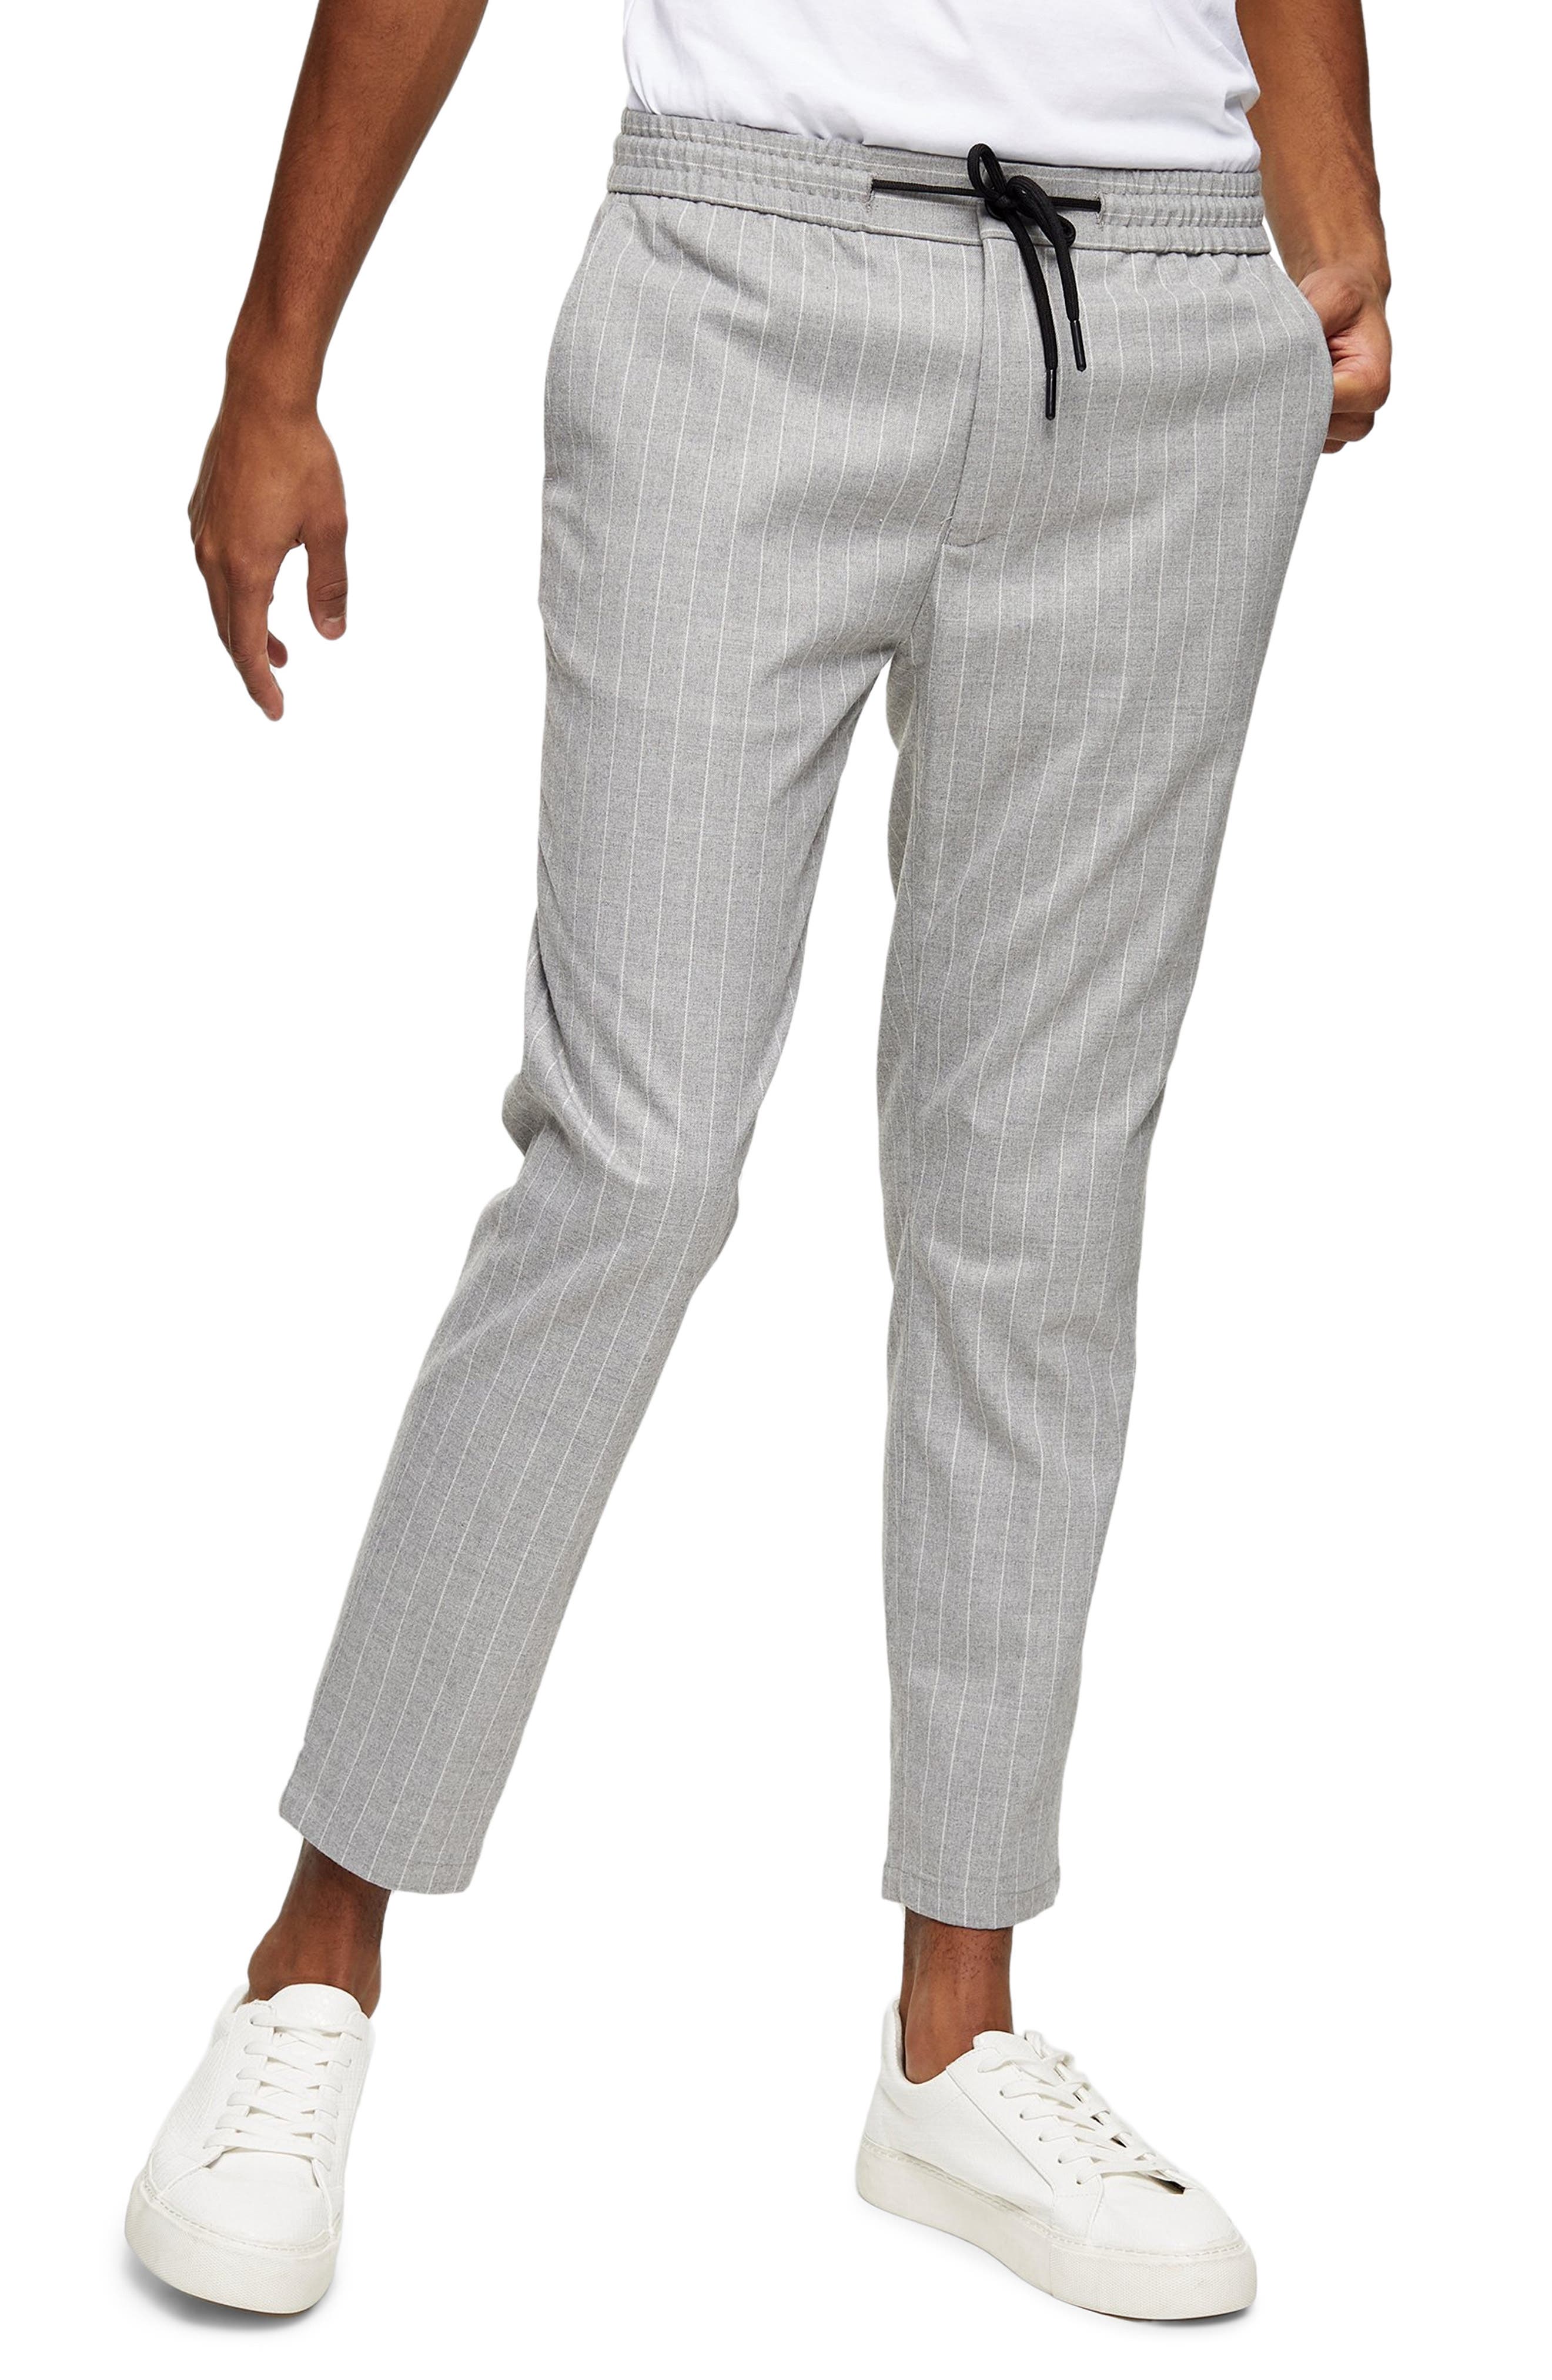 dress pants with stripe down the side mens